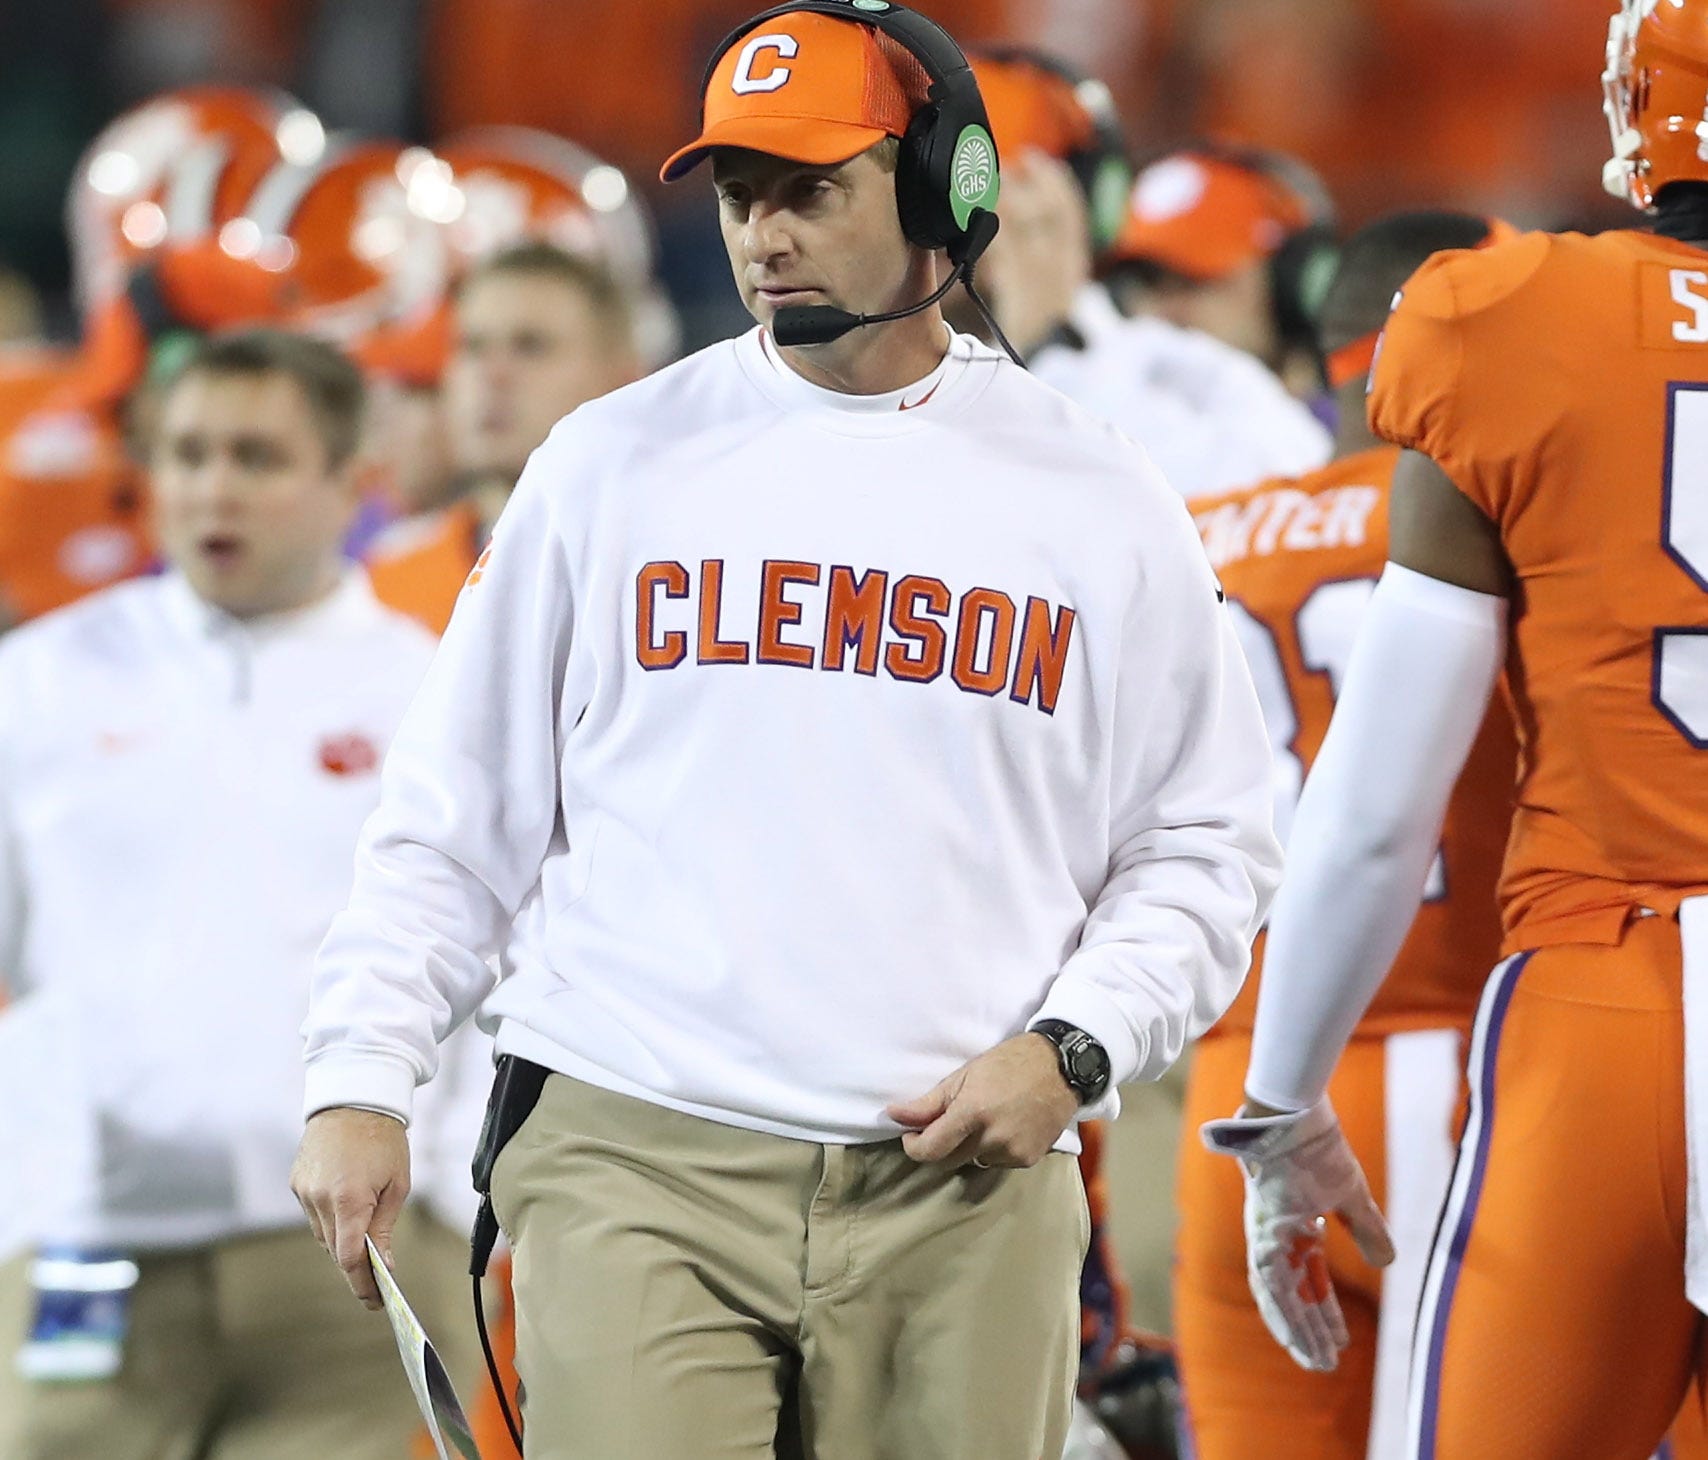 Clemson coach Dabo Swinney watches from the sideline during the first quarter of the ACC championship game against Miami (Fla.).